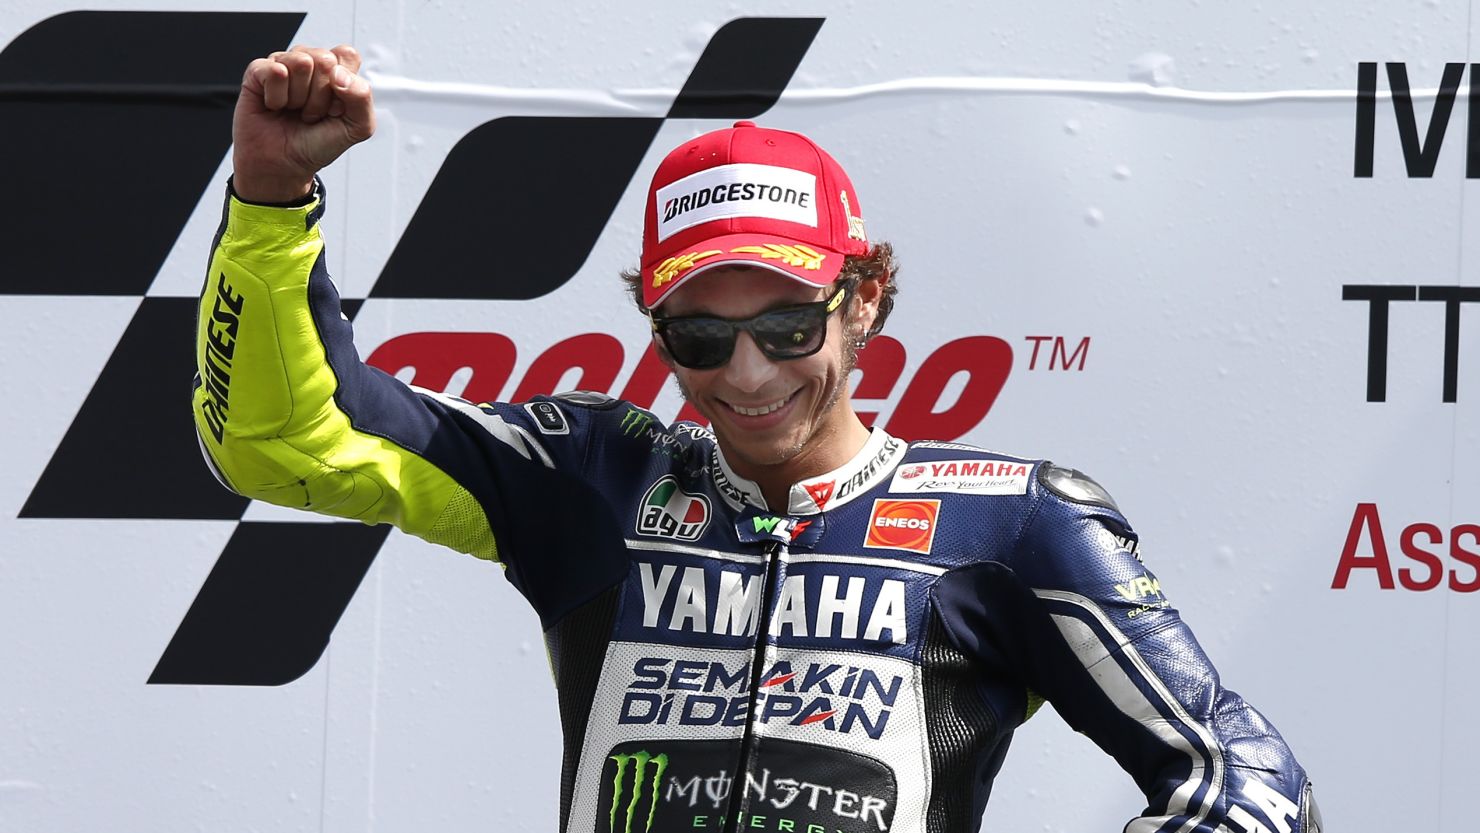 Valentino Rossi returned to the top of the podium with a superb victory at Assen.